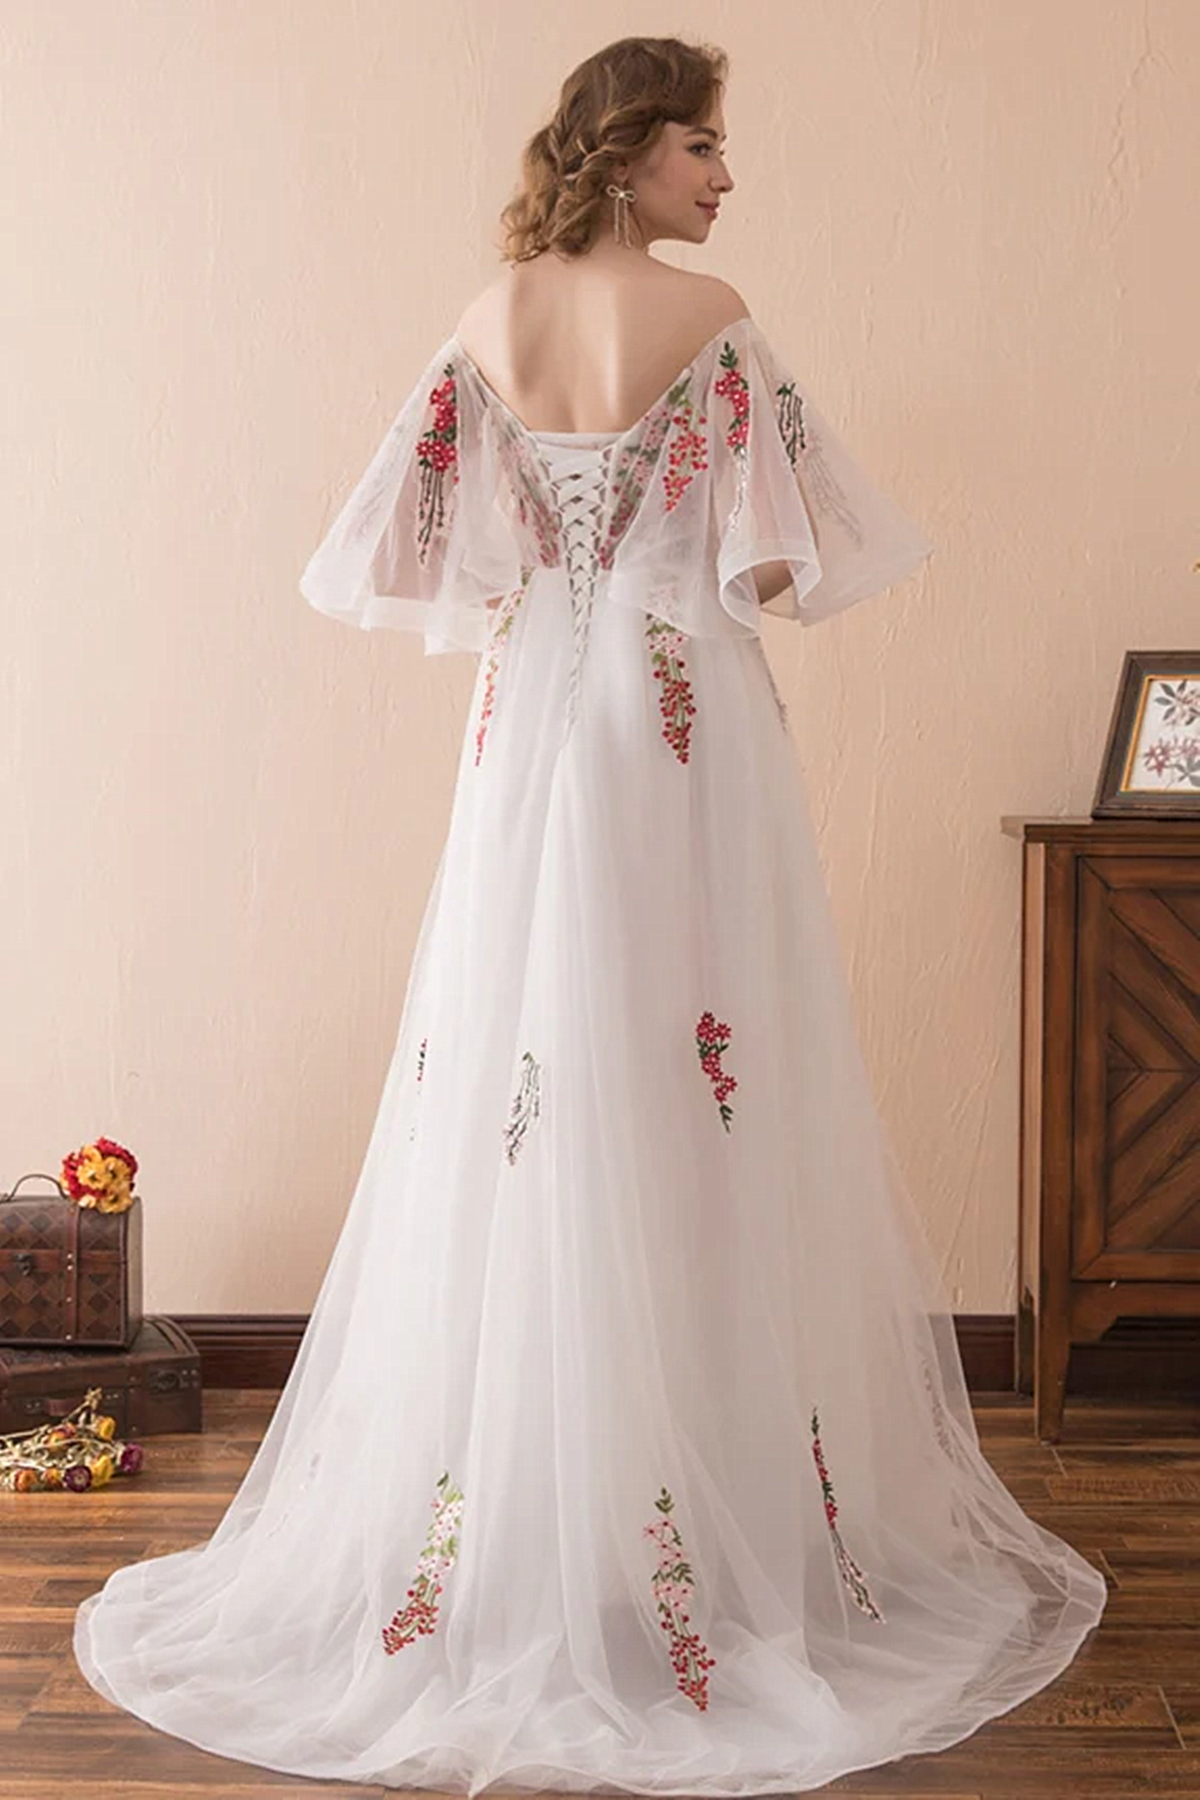 White Tulle with Lace Off Shoulder Long Party Dress, White Floral Wedding Party Dress